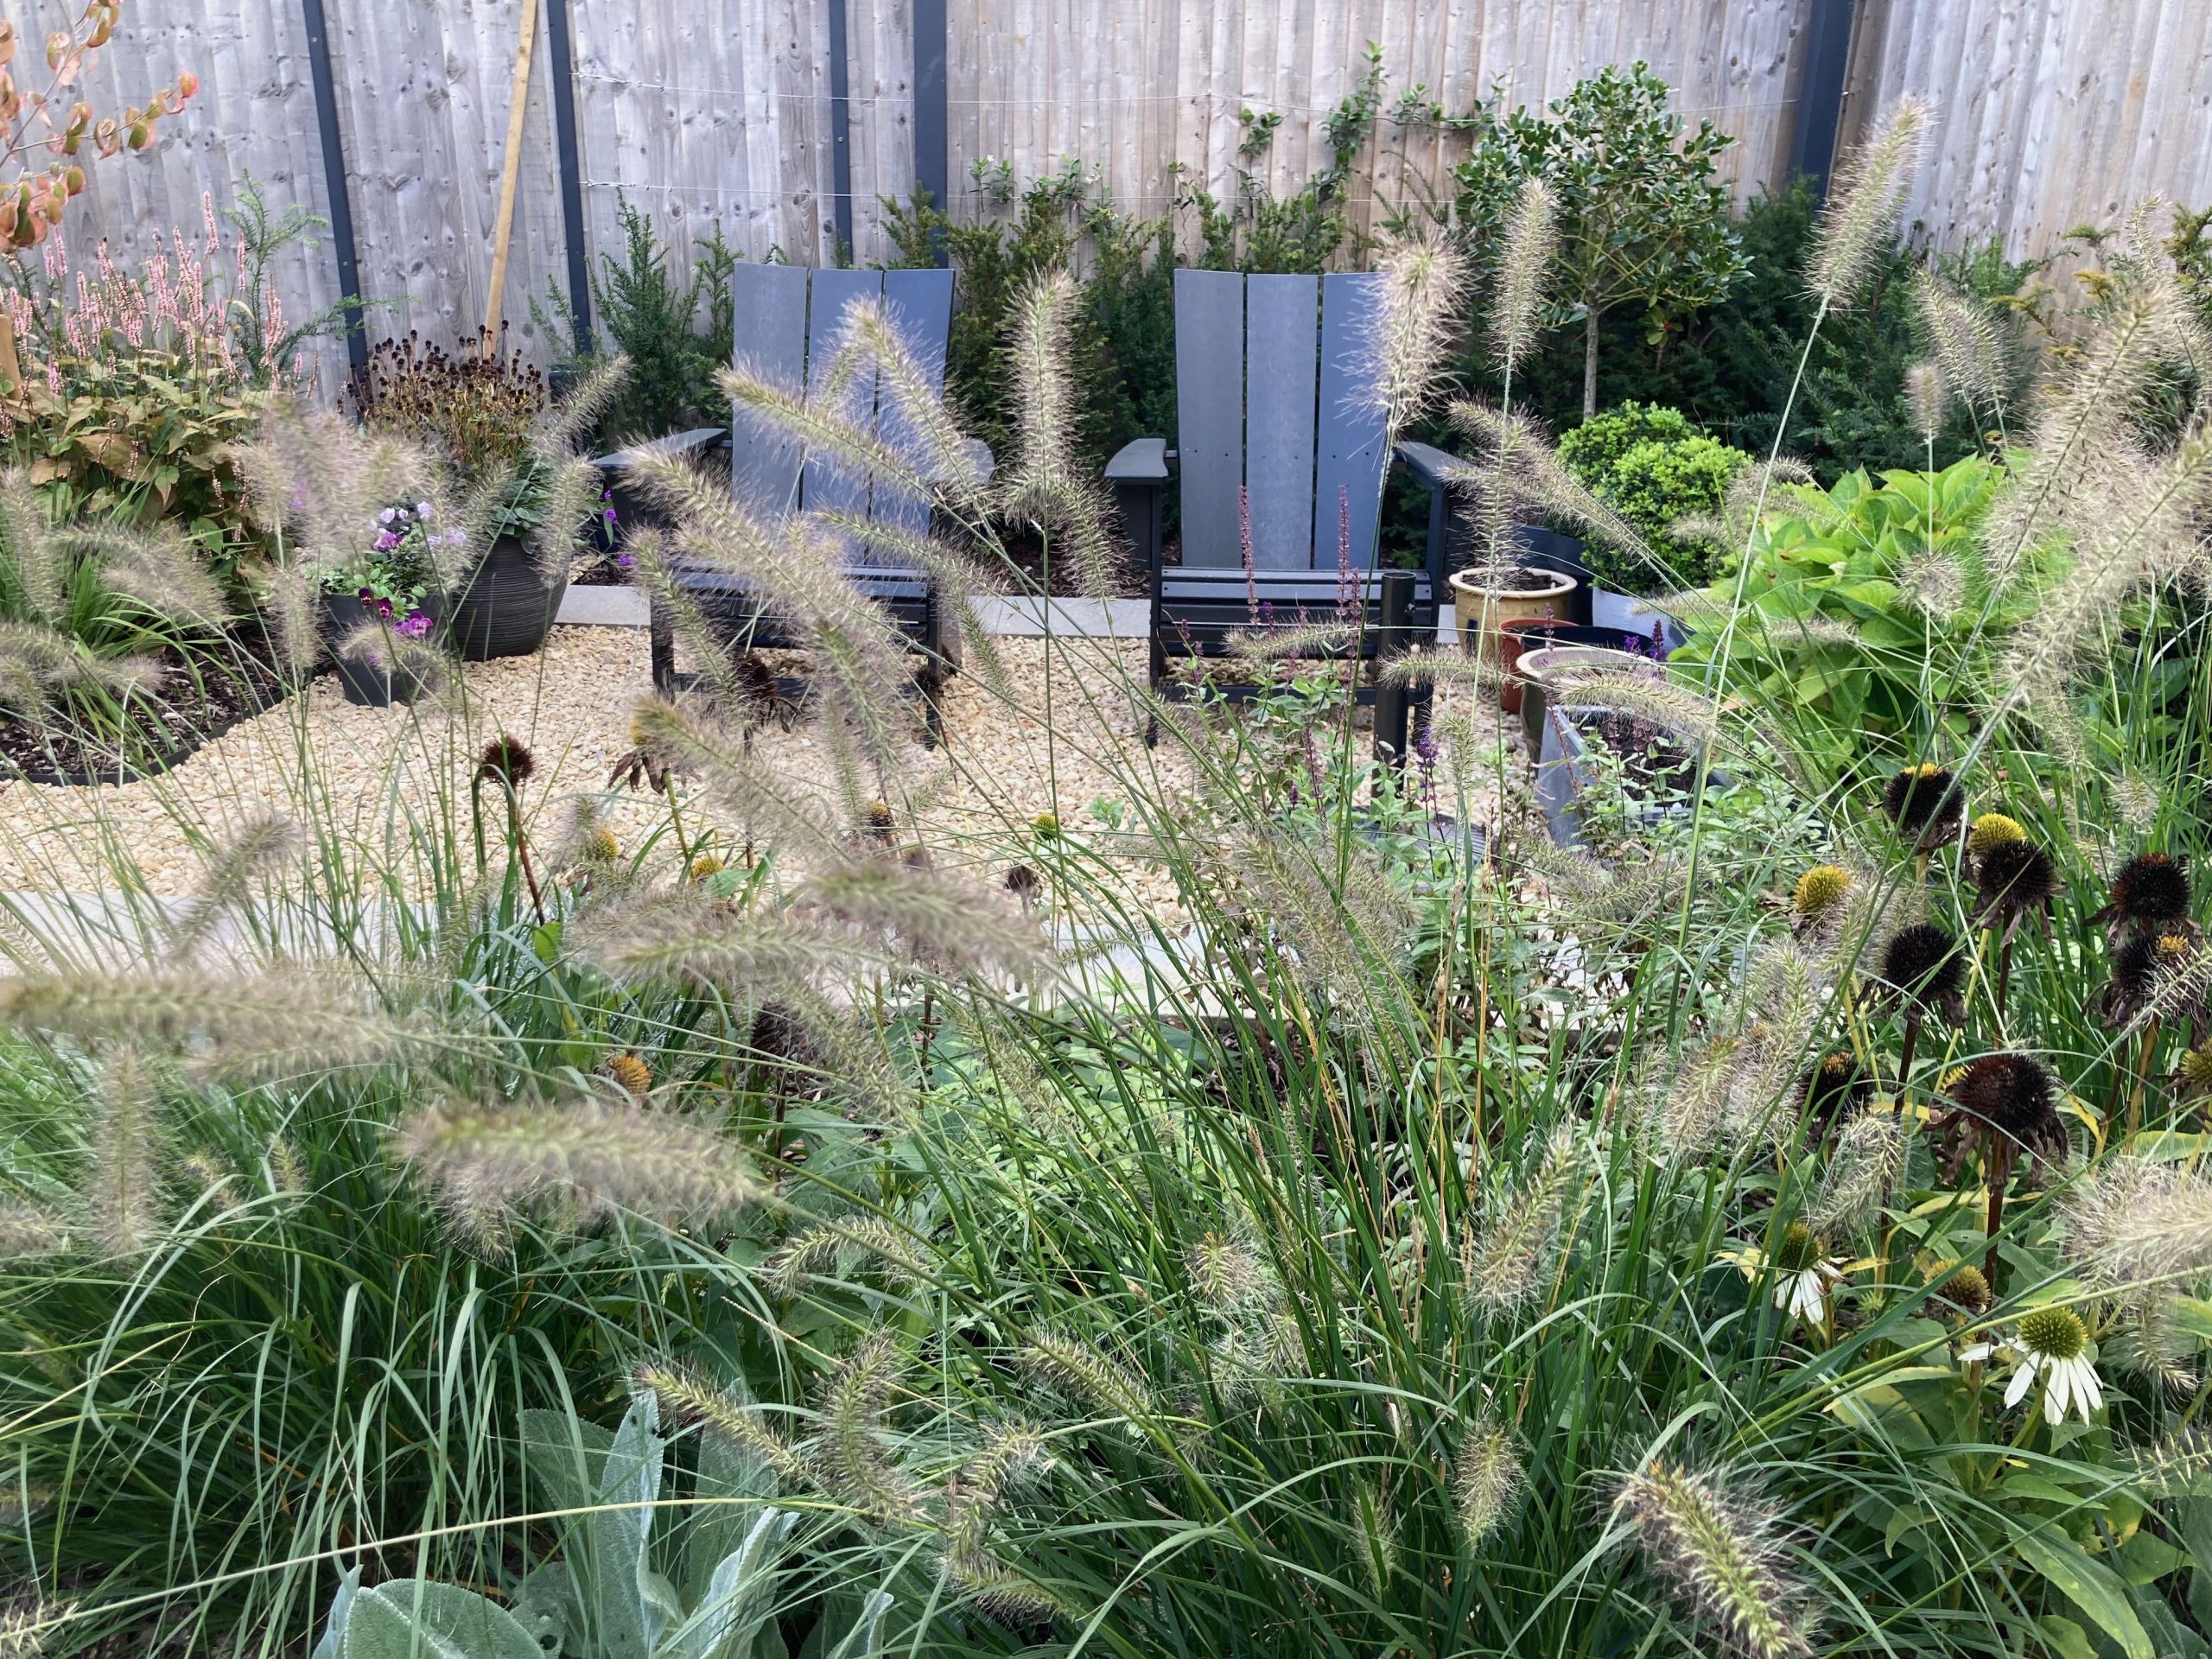 Garden desin with a seating area amongst ornamental grasses